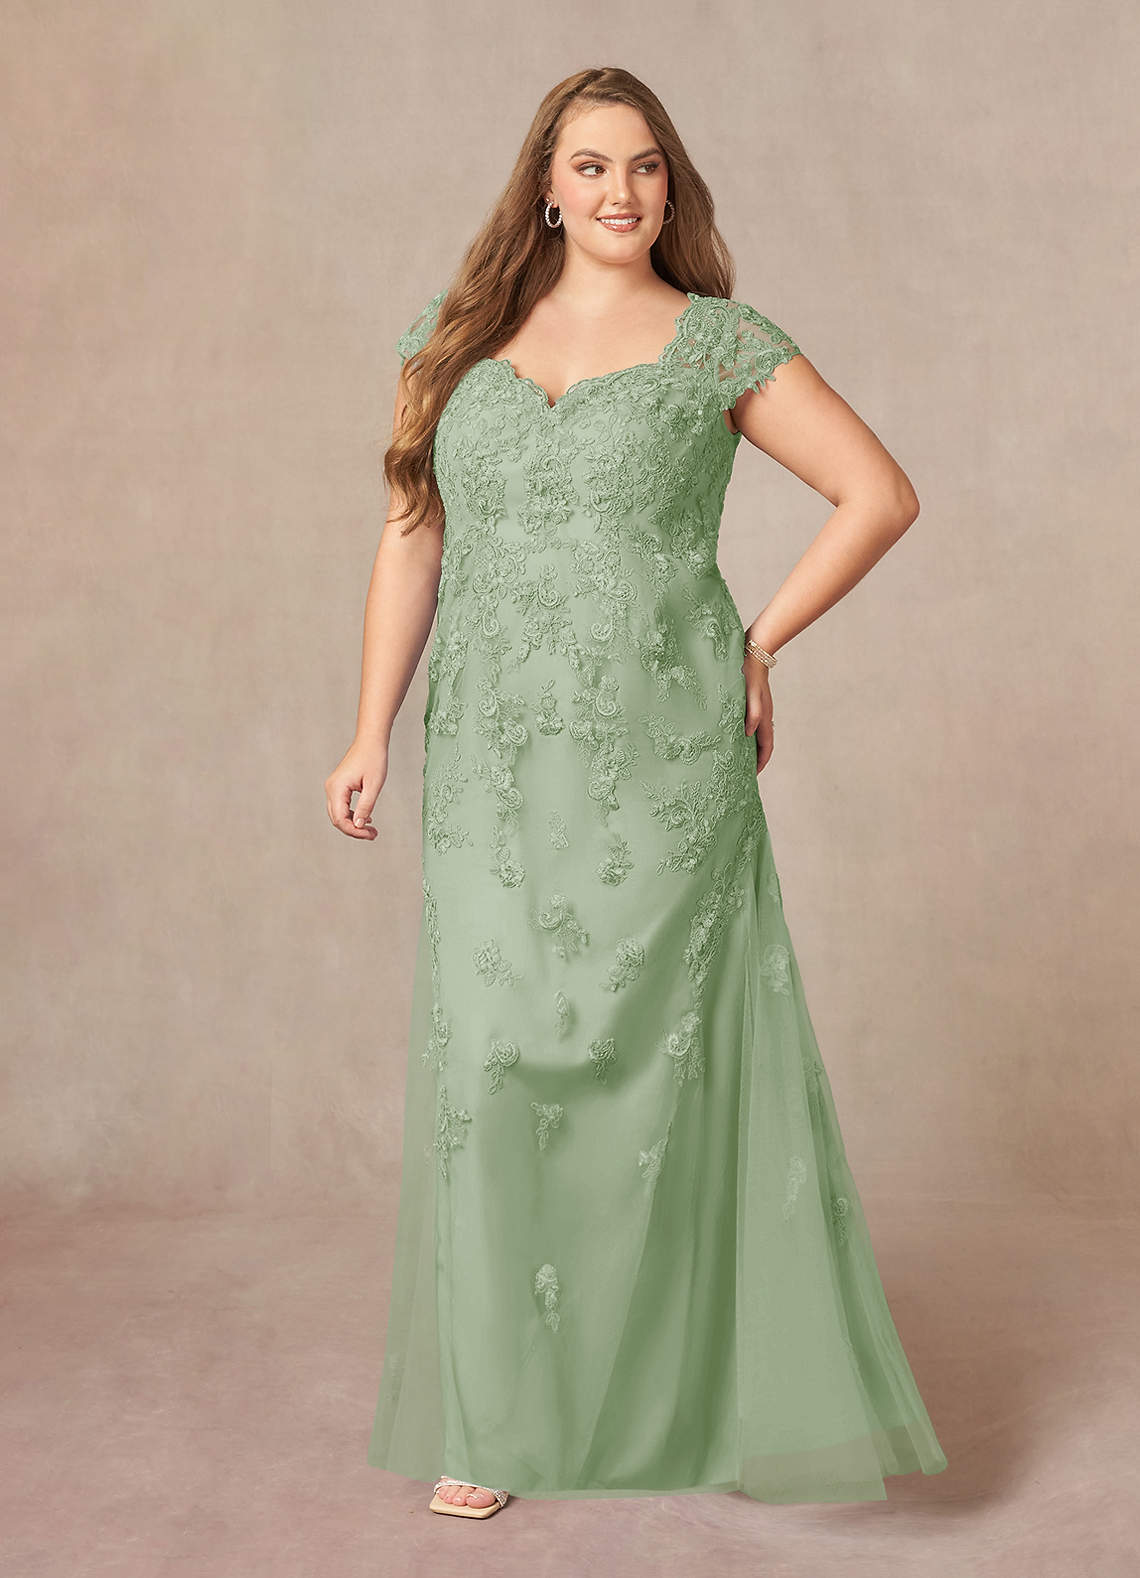 Azazie Marbella Mother of the Bride Dresses Mermaid Queen Anne Sequins Lace Floor-Length Dress image1